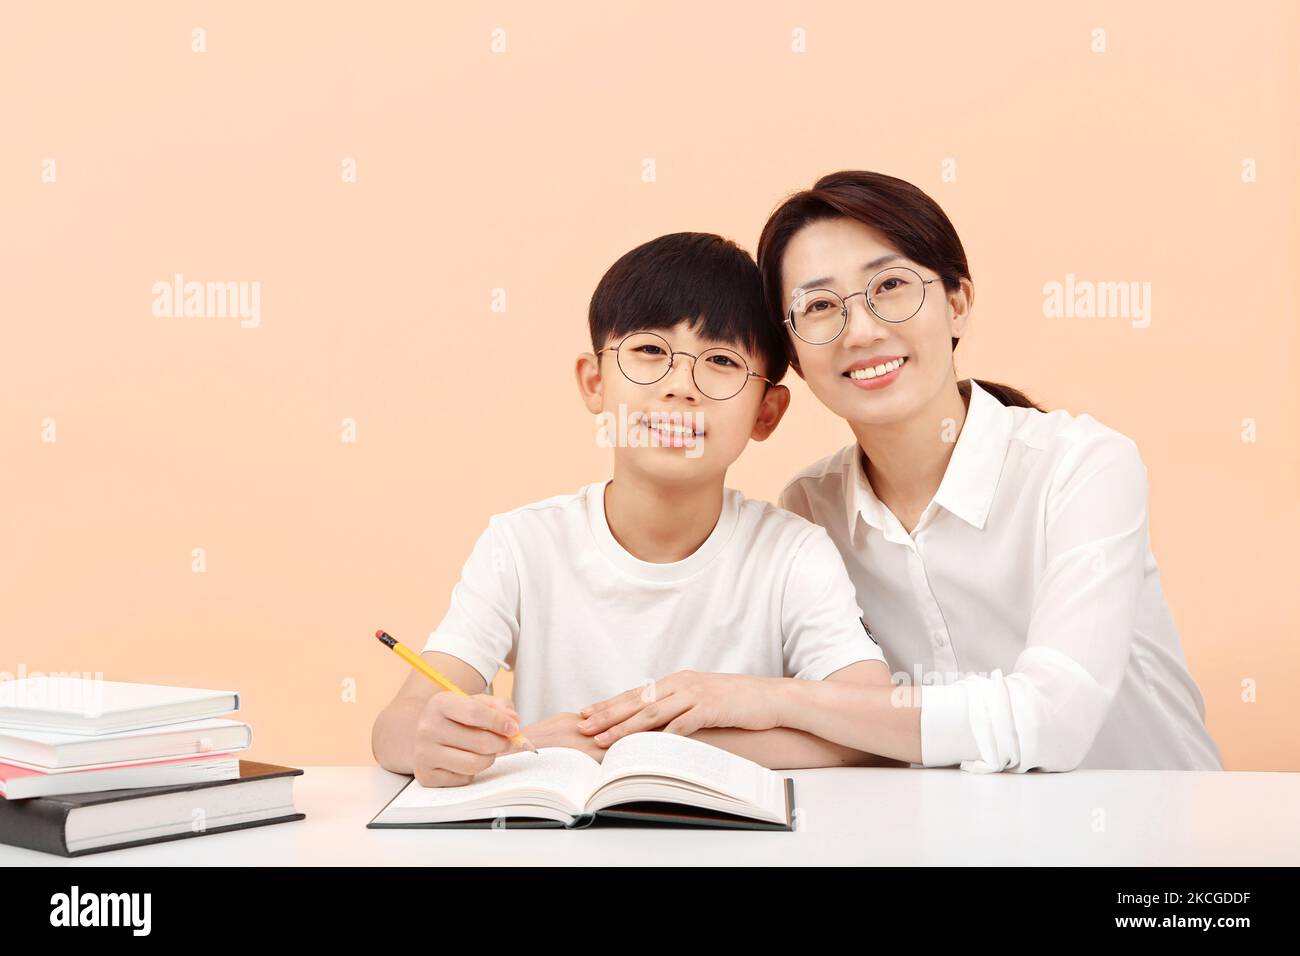 Happy learning time A student studying happily with a teacher or mother with a bright smile Stock Photo